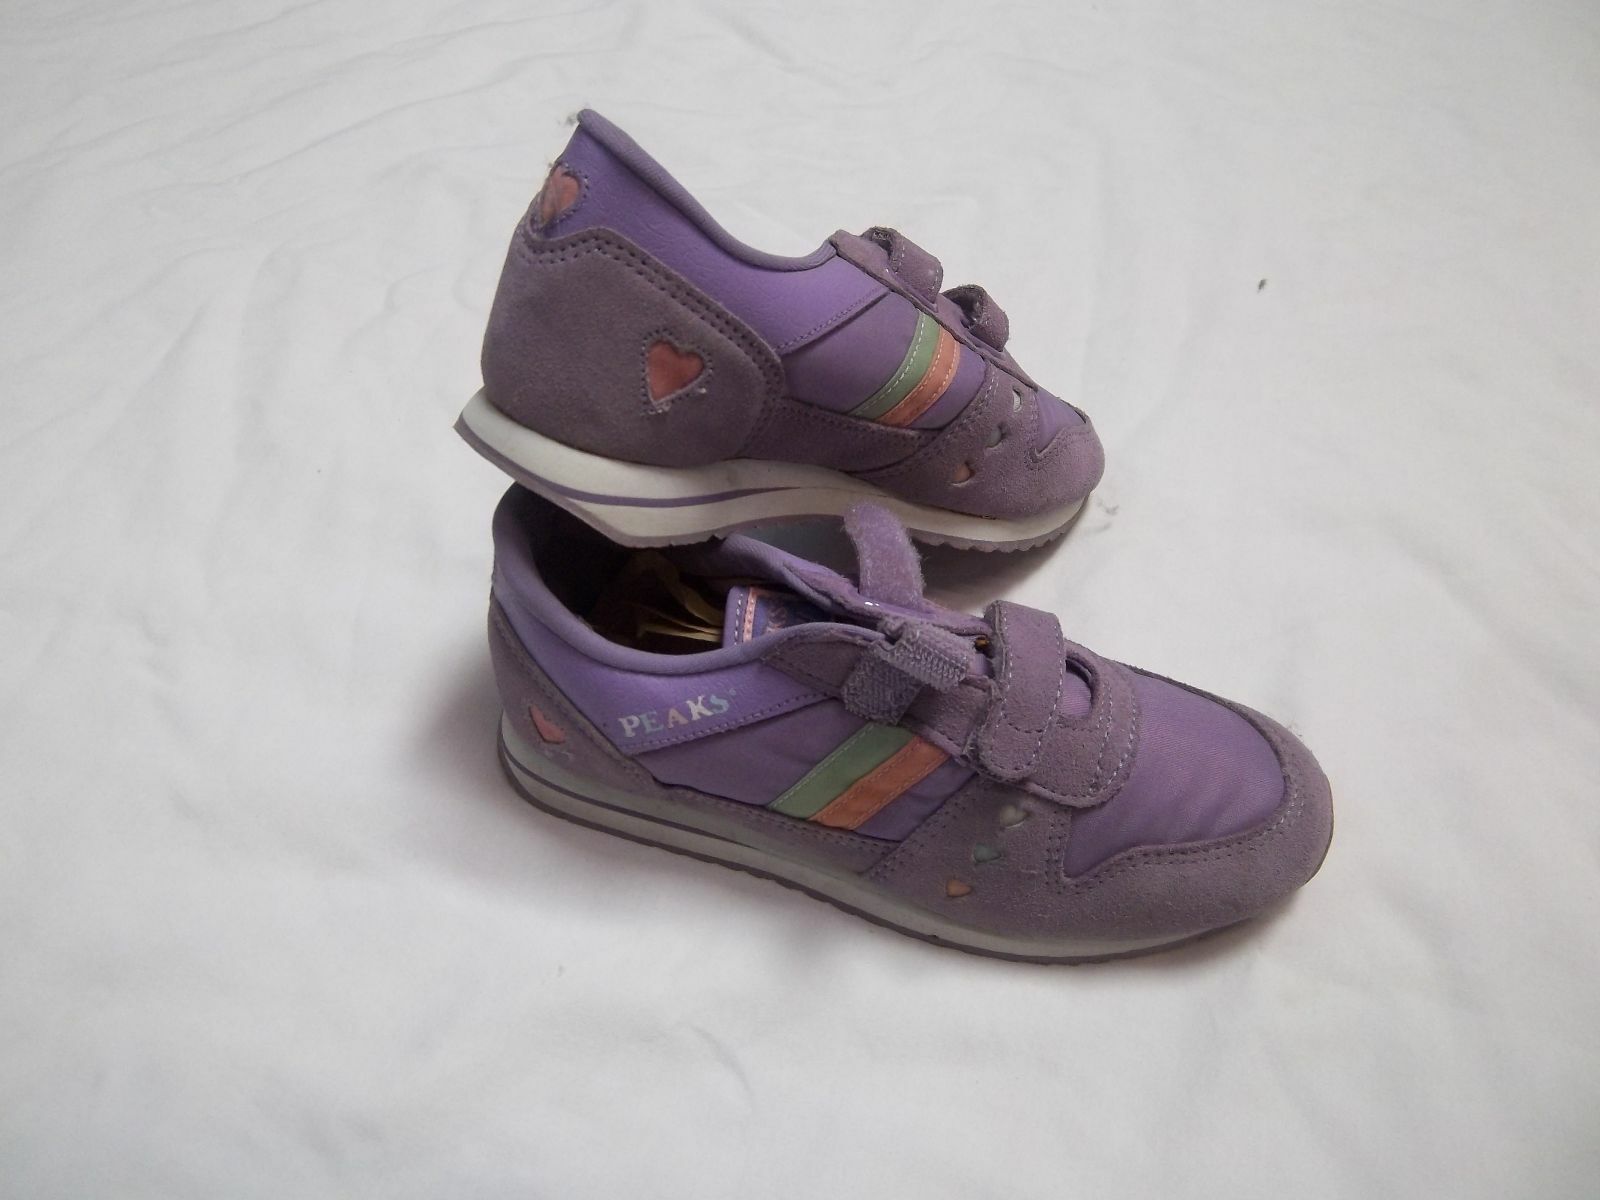 PEAKS   386 VINTAGE YOUTH  LILAC TENNIS SHOE(VARIOUS SIZES)